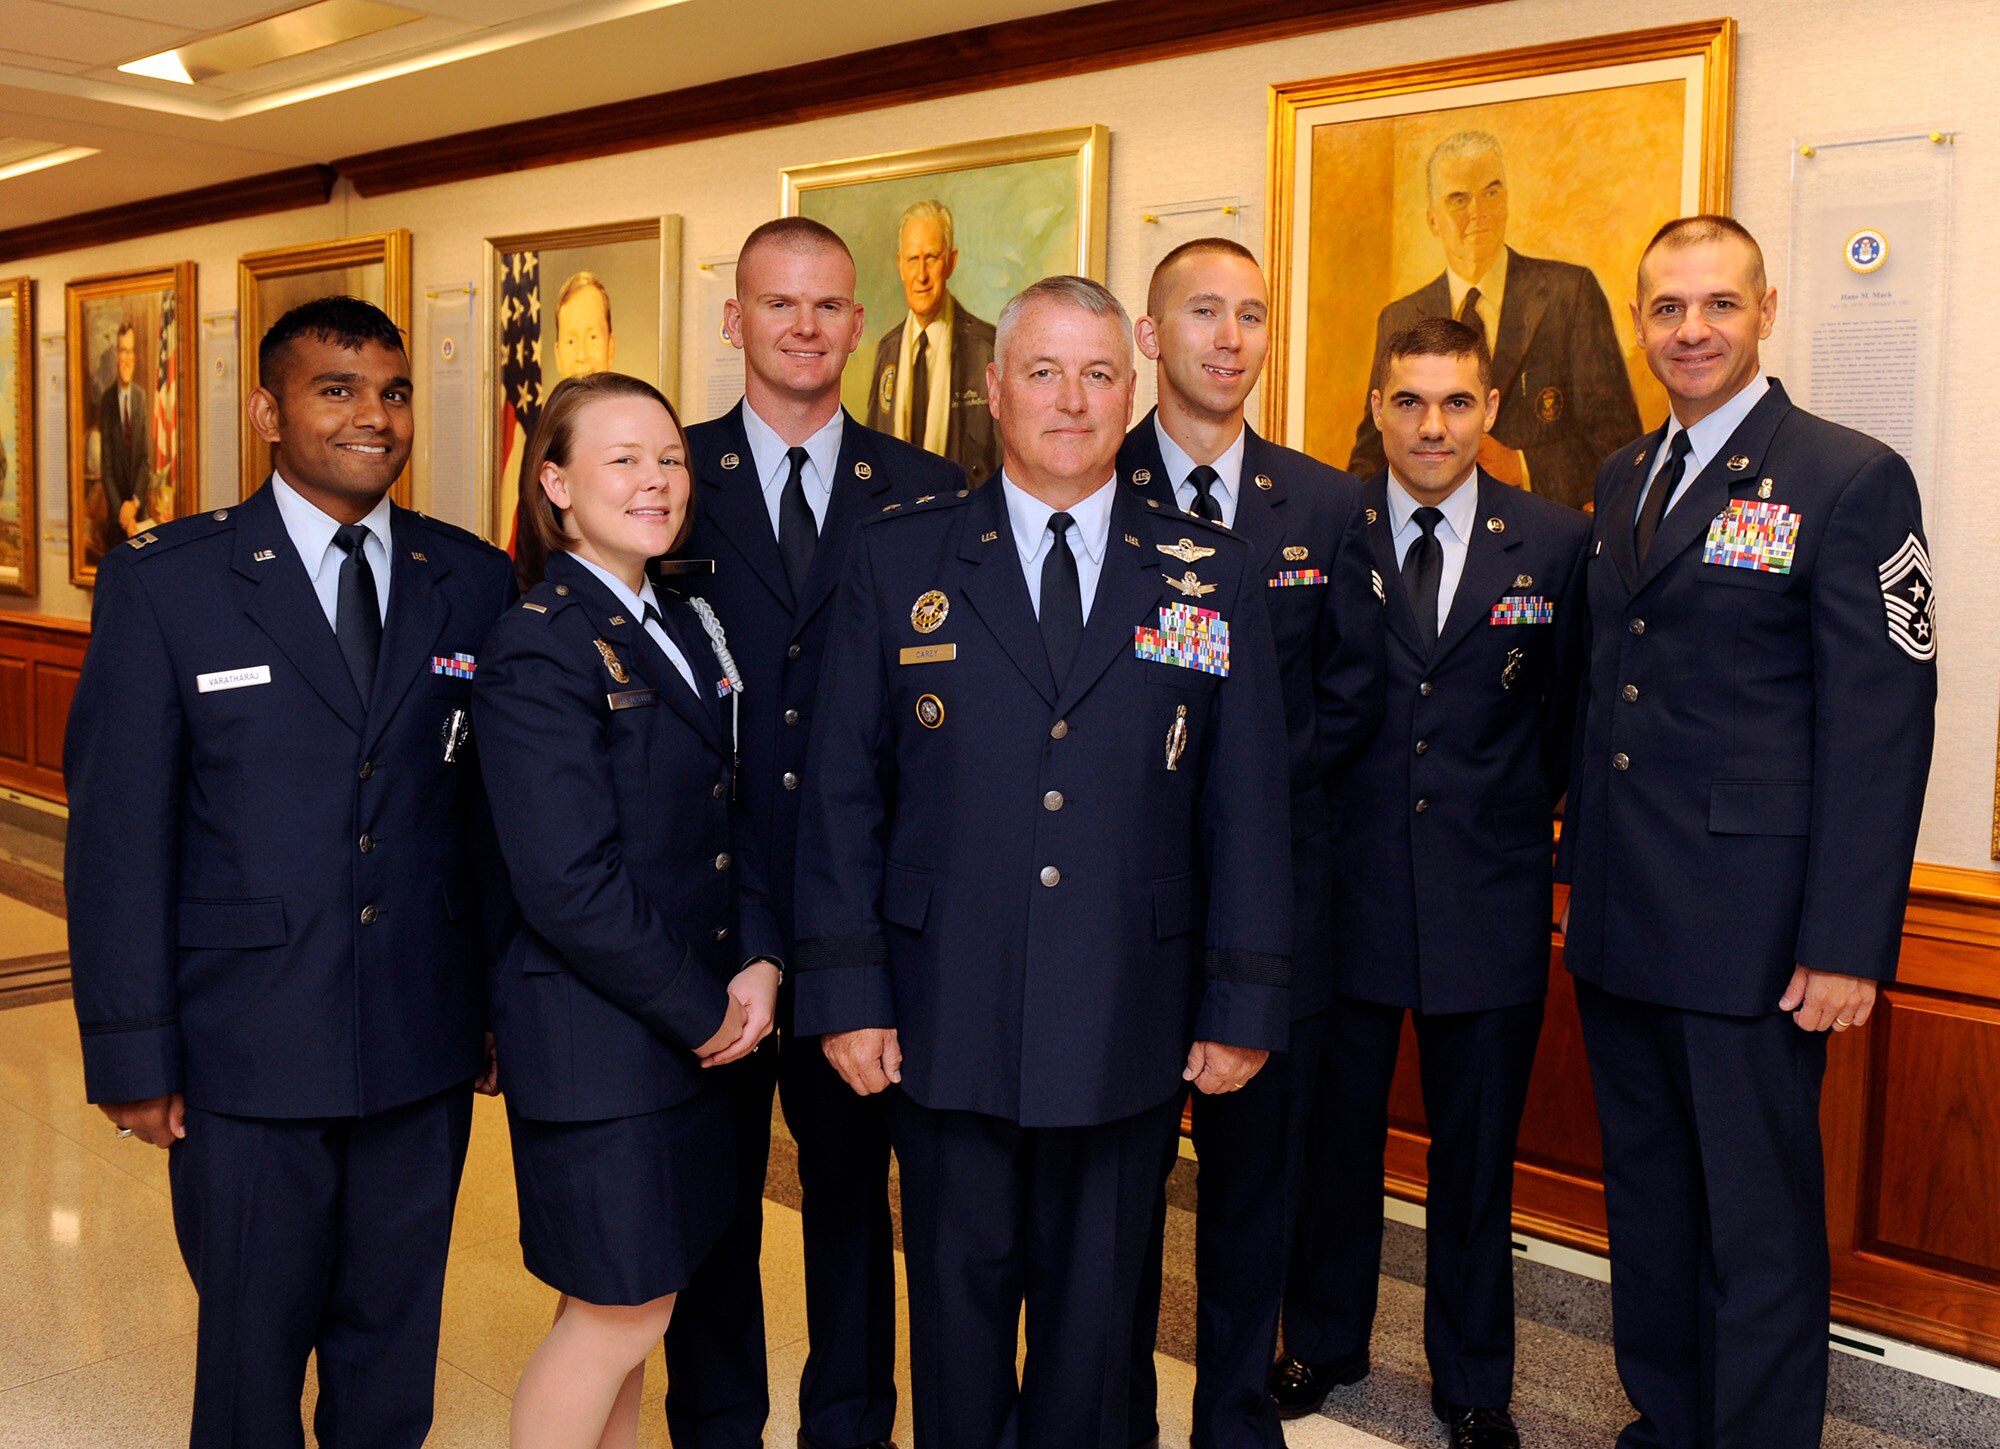 Maj. Gen. Michael Carey, 20th AF commander (center) brought a small
delegation of Airmen to brief Air Force leadership Sept. 4 in Washington,
D.C., on the mission, the people, the history and the way-ahead of the
Department of Defense's only immediate response nuclear alert force.  20th
AF Airmen from Minot Air Force Base, N.D., F.E. Warren AFB, Wyo., and
Malmstrom AFB, Mont., are (left to right) Capt. A.J. Varatharaj, 91st
Missile Wing ; 1st Lt. Megan Sylvester, 20th AF; Staff Sgt. Gary Murley,
90th MW;  SrA Kyle Murphy, 341st MW; Staff Sgt. Walter Bernardo, 91st MW;
and Chief Master Sgt. David Nordel, 20th AF. (U.S. Air Force photo by Andy Morataya)